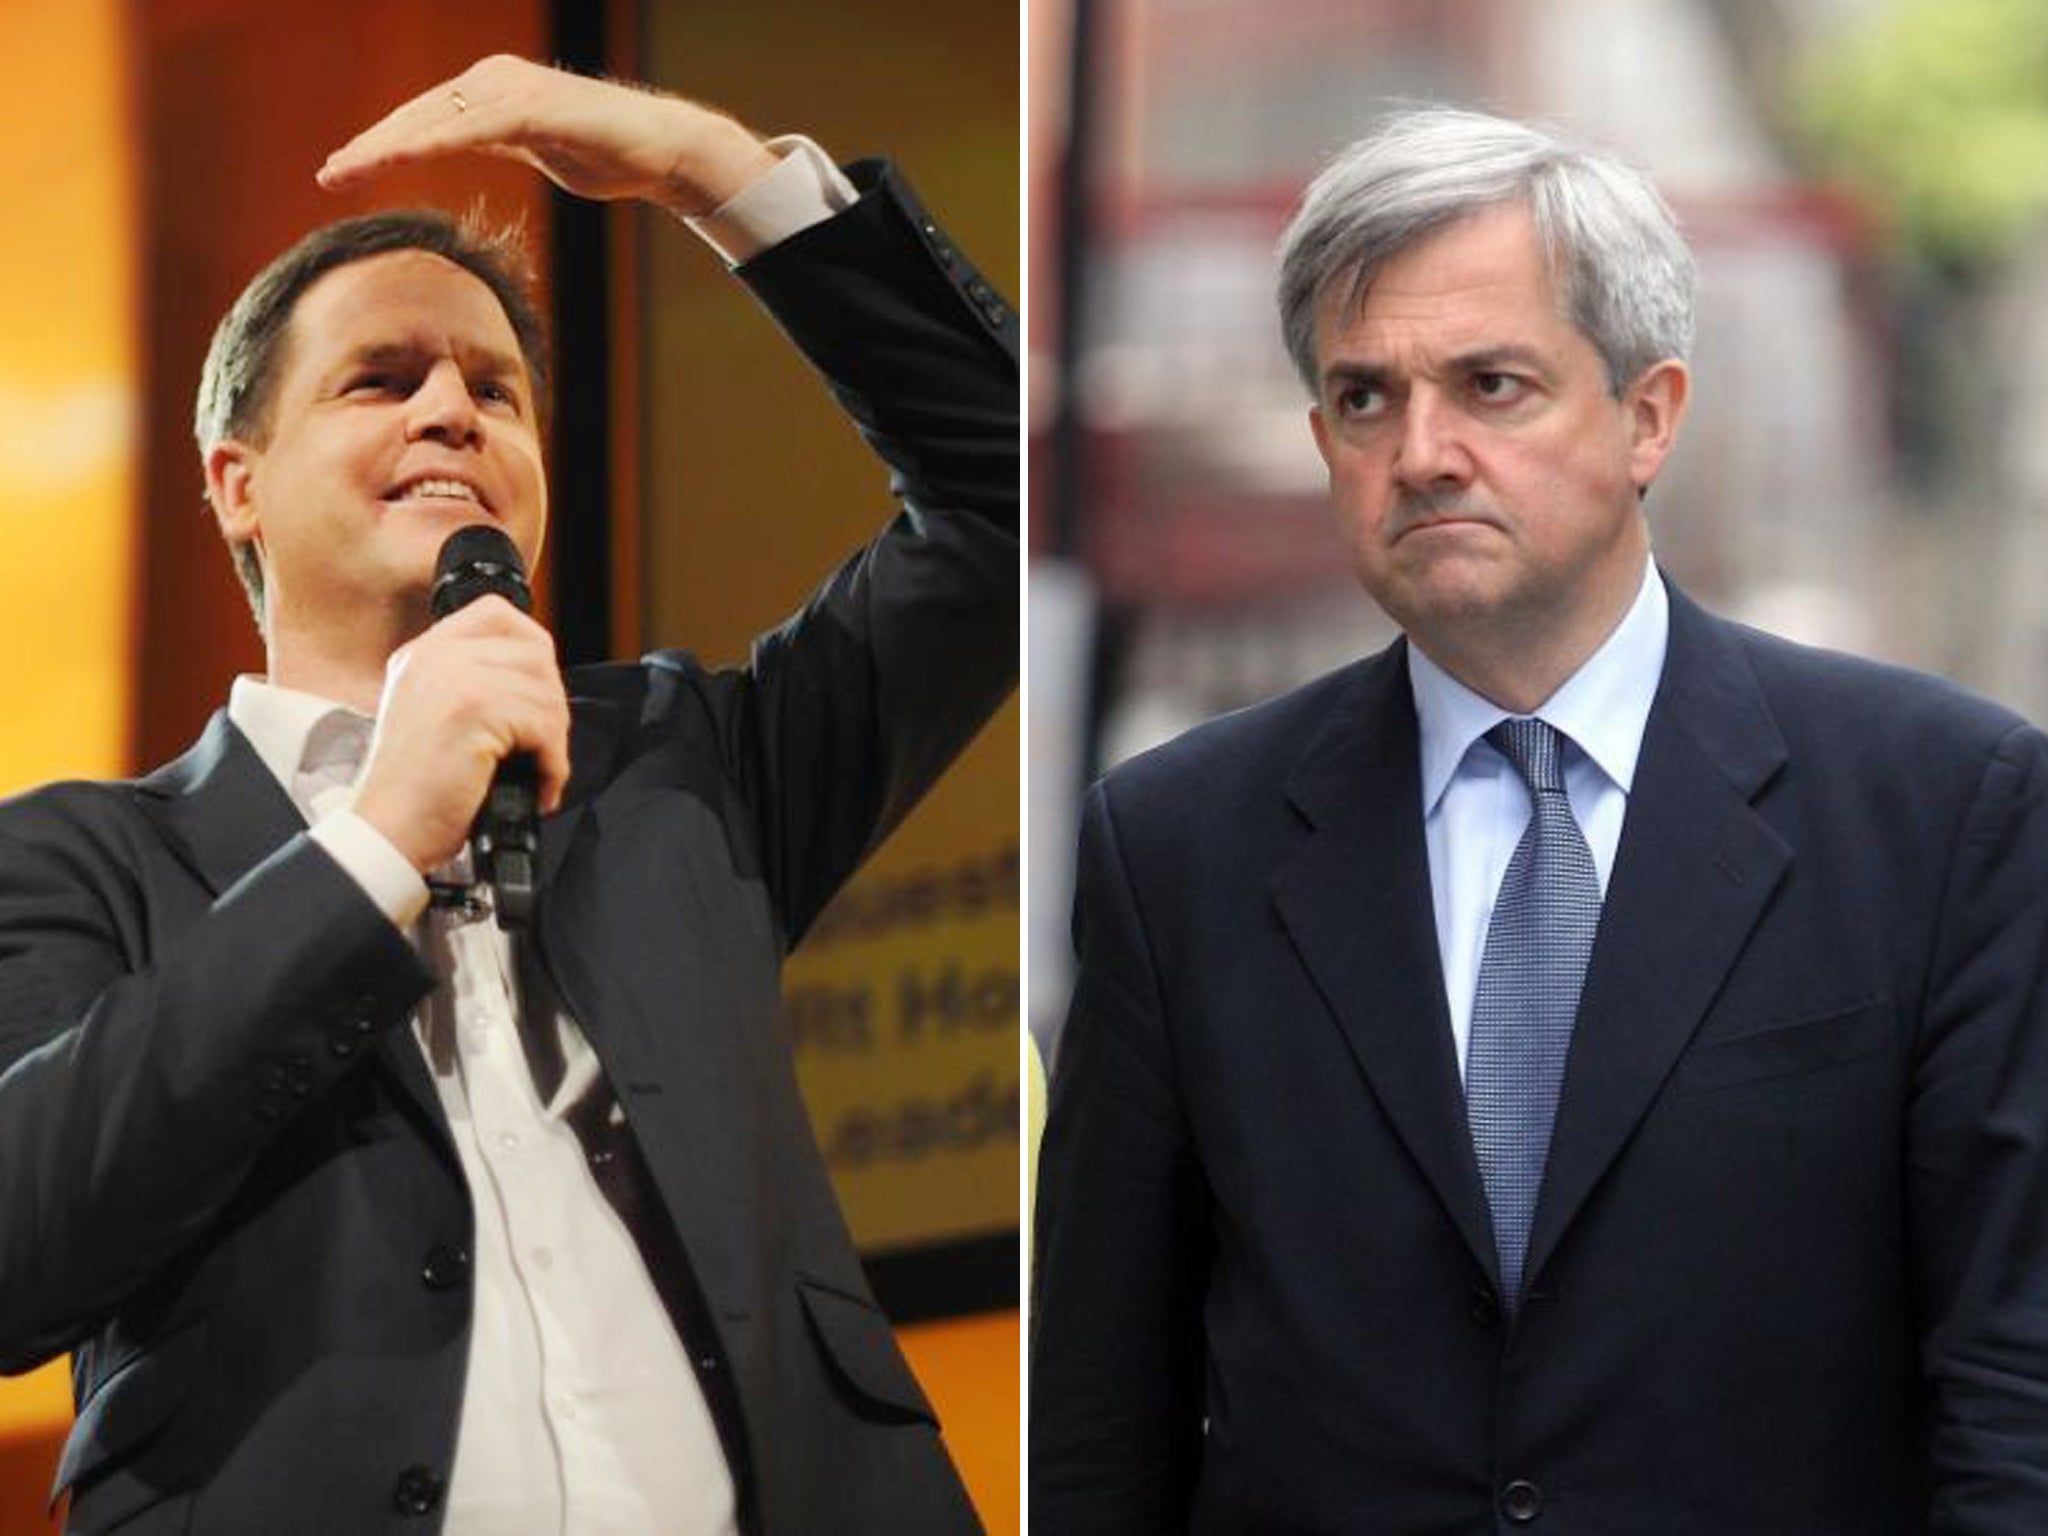 Nick Clegg (left) says of Chris Huhne: "Whatever he's done, he still remains someone I've known for many years and a friend"